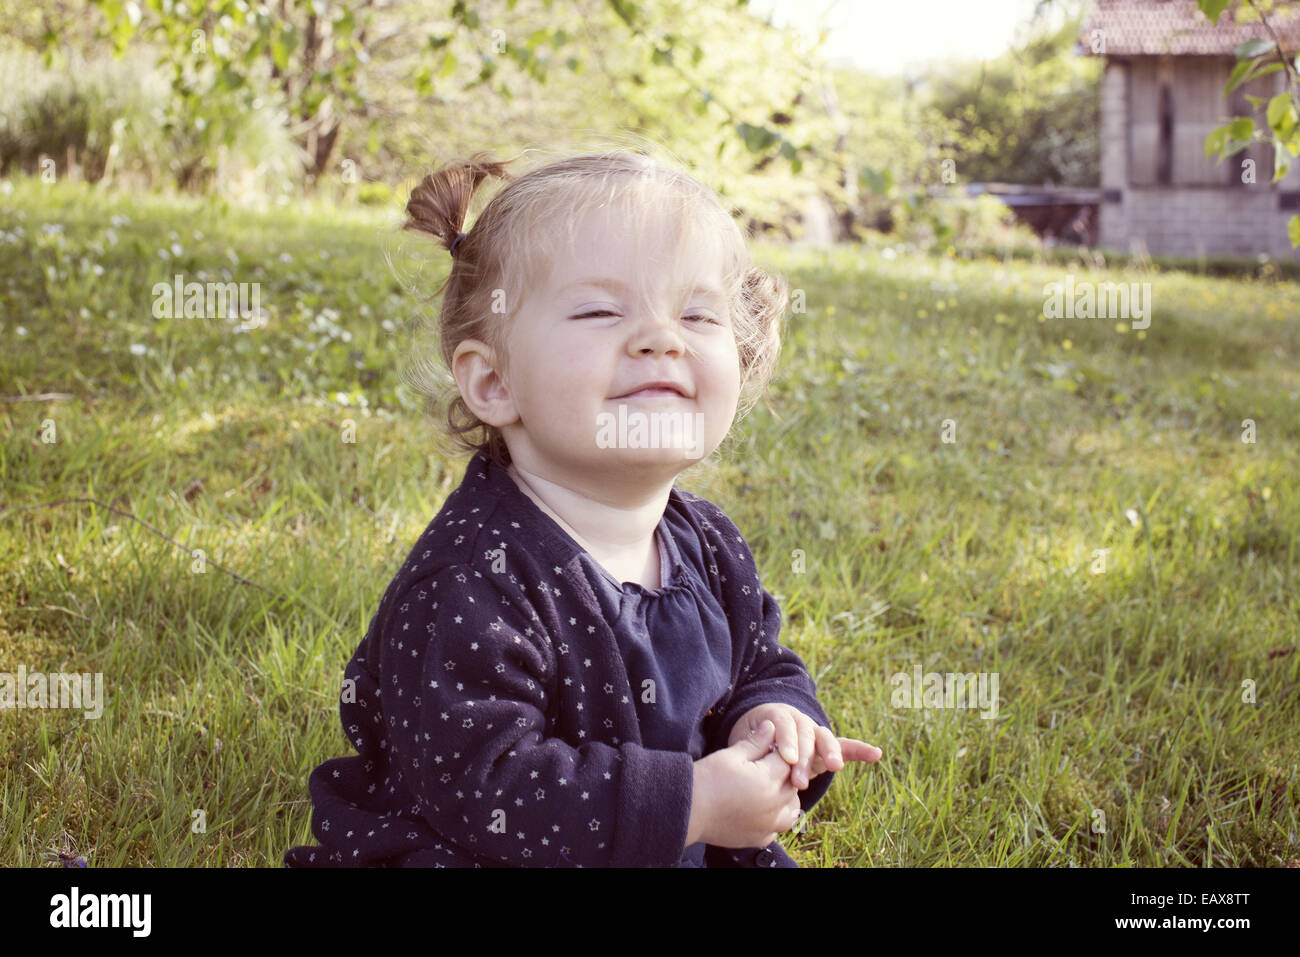 Baby girl smiling outdoors Stock Photo